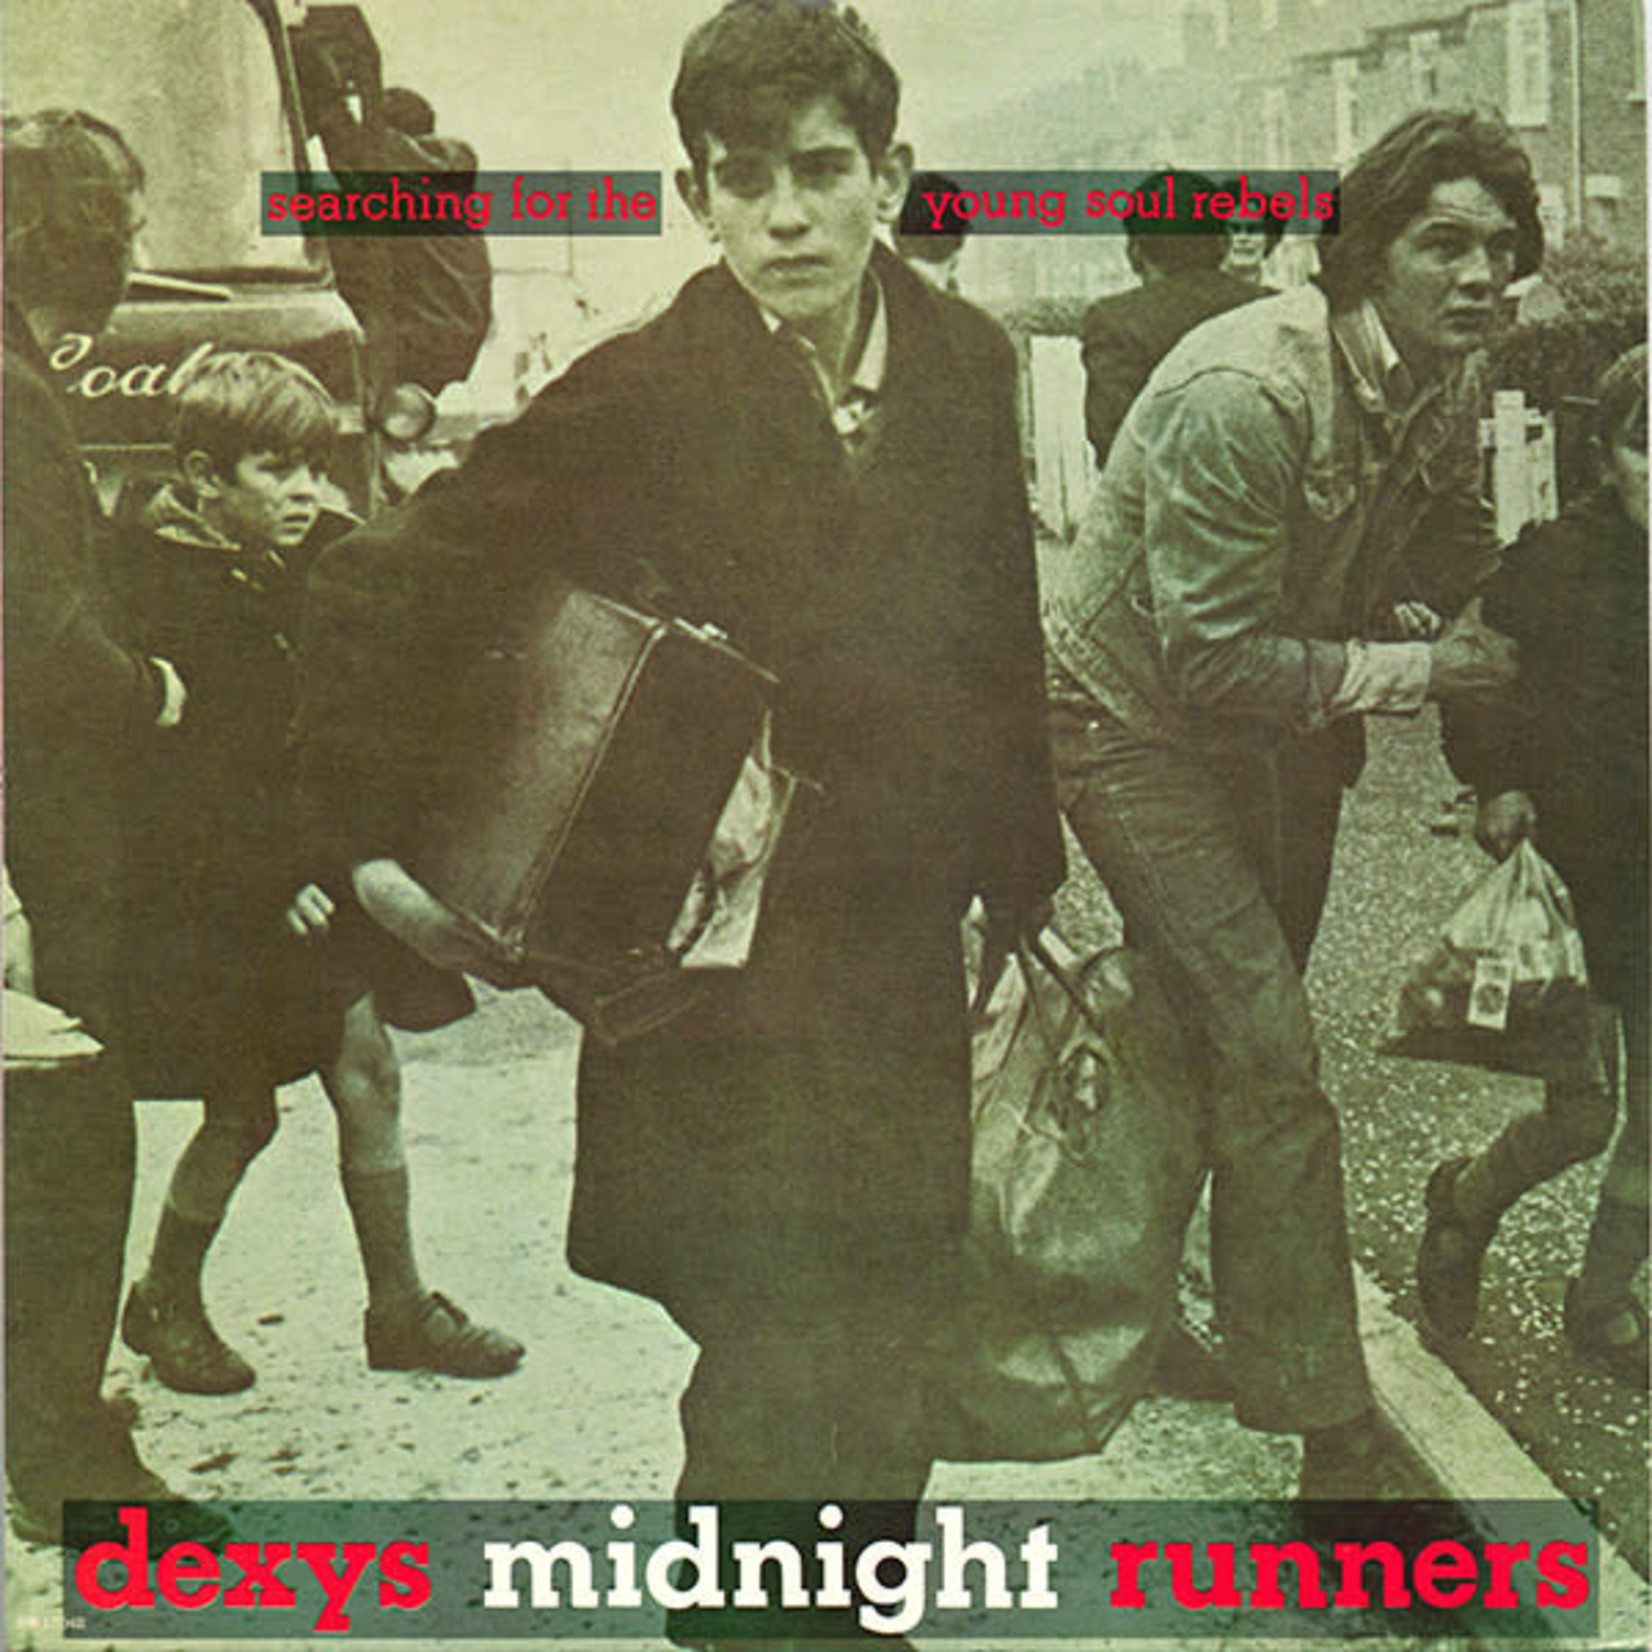 Dexy's Midnight Runners: Searching for the Young Soul Rebels [VINTAGE]